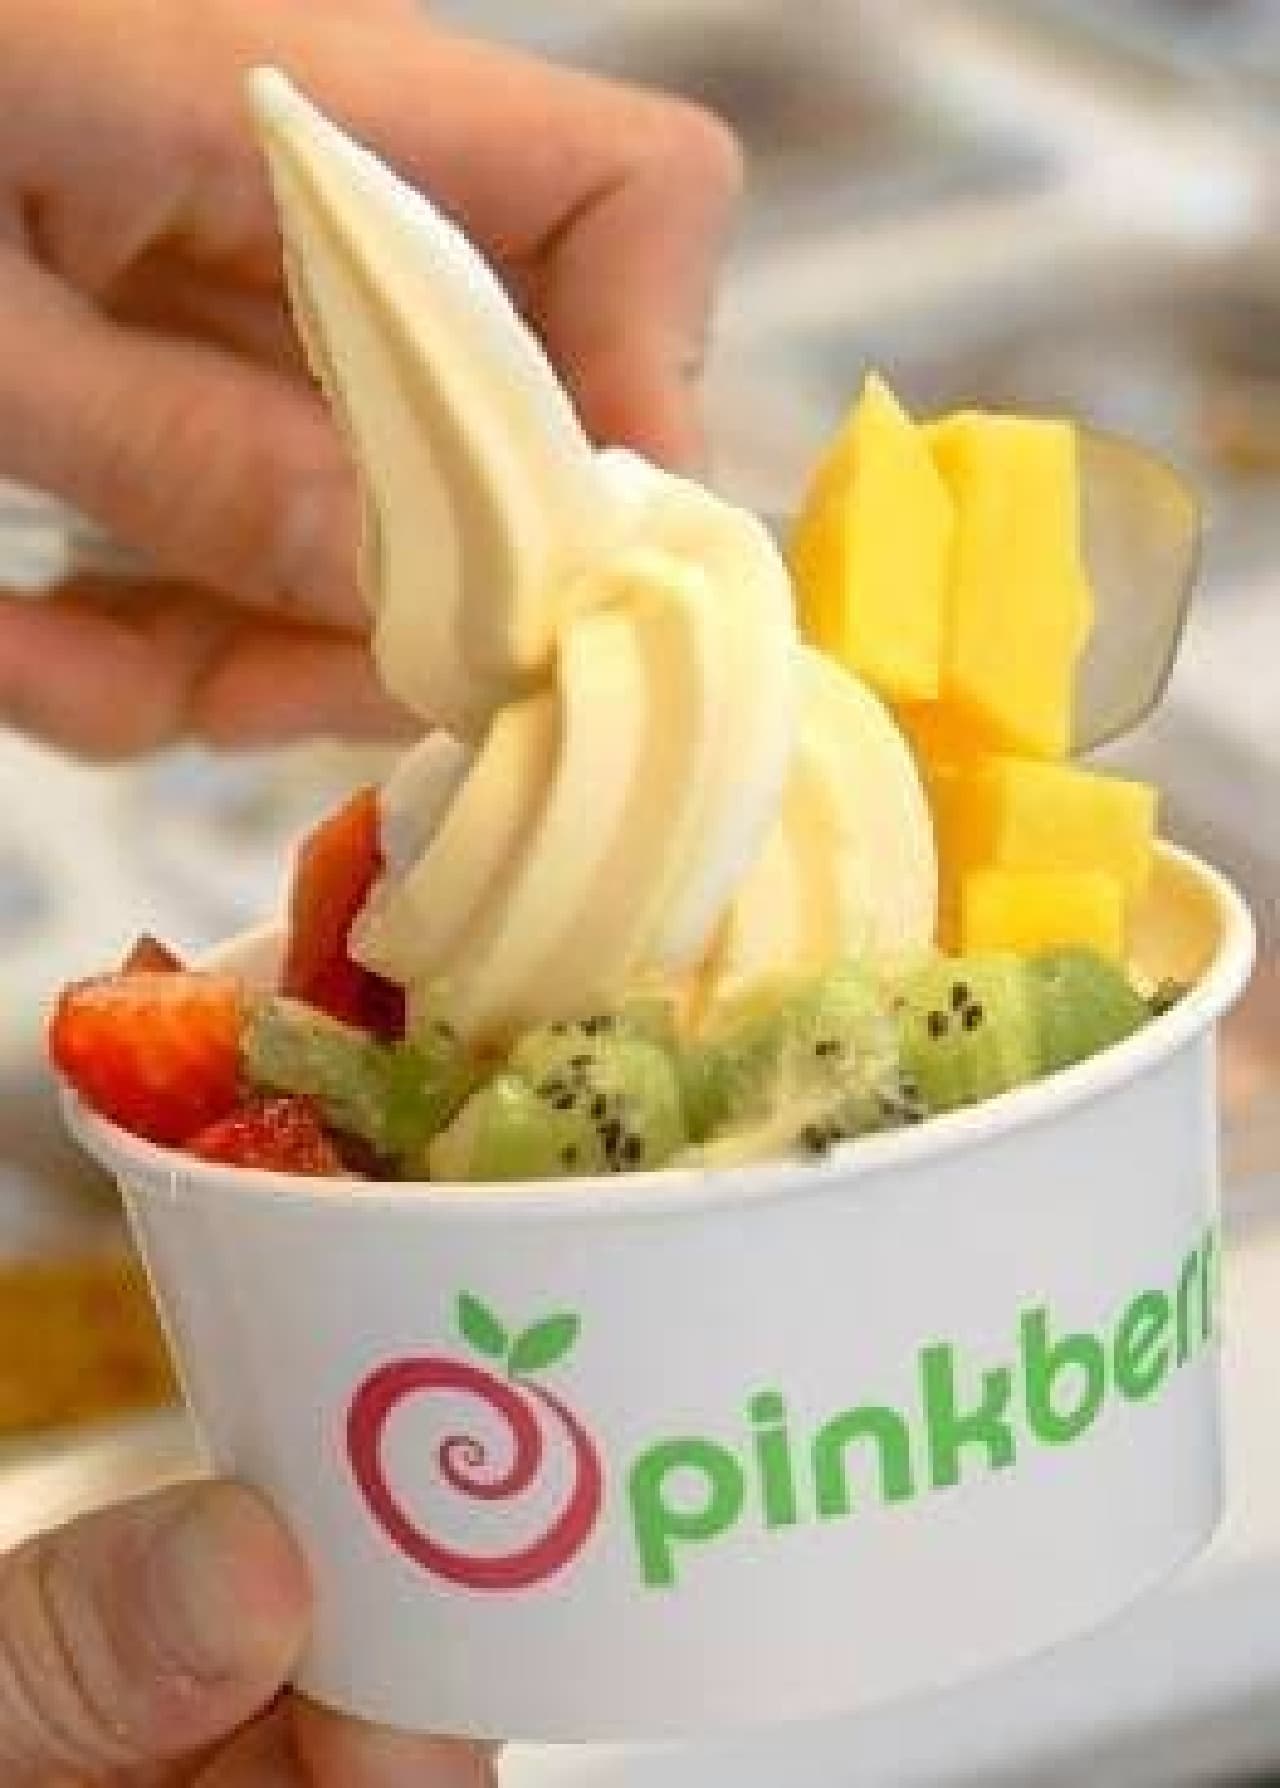 The world-famous "pinkberry" is coming to Japan!